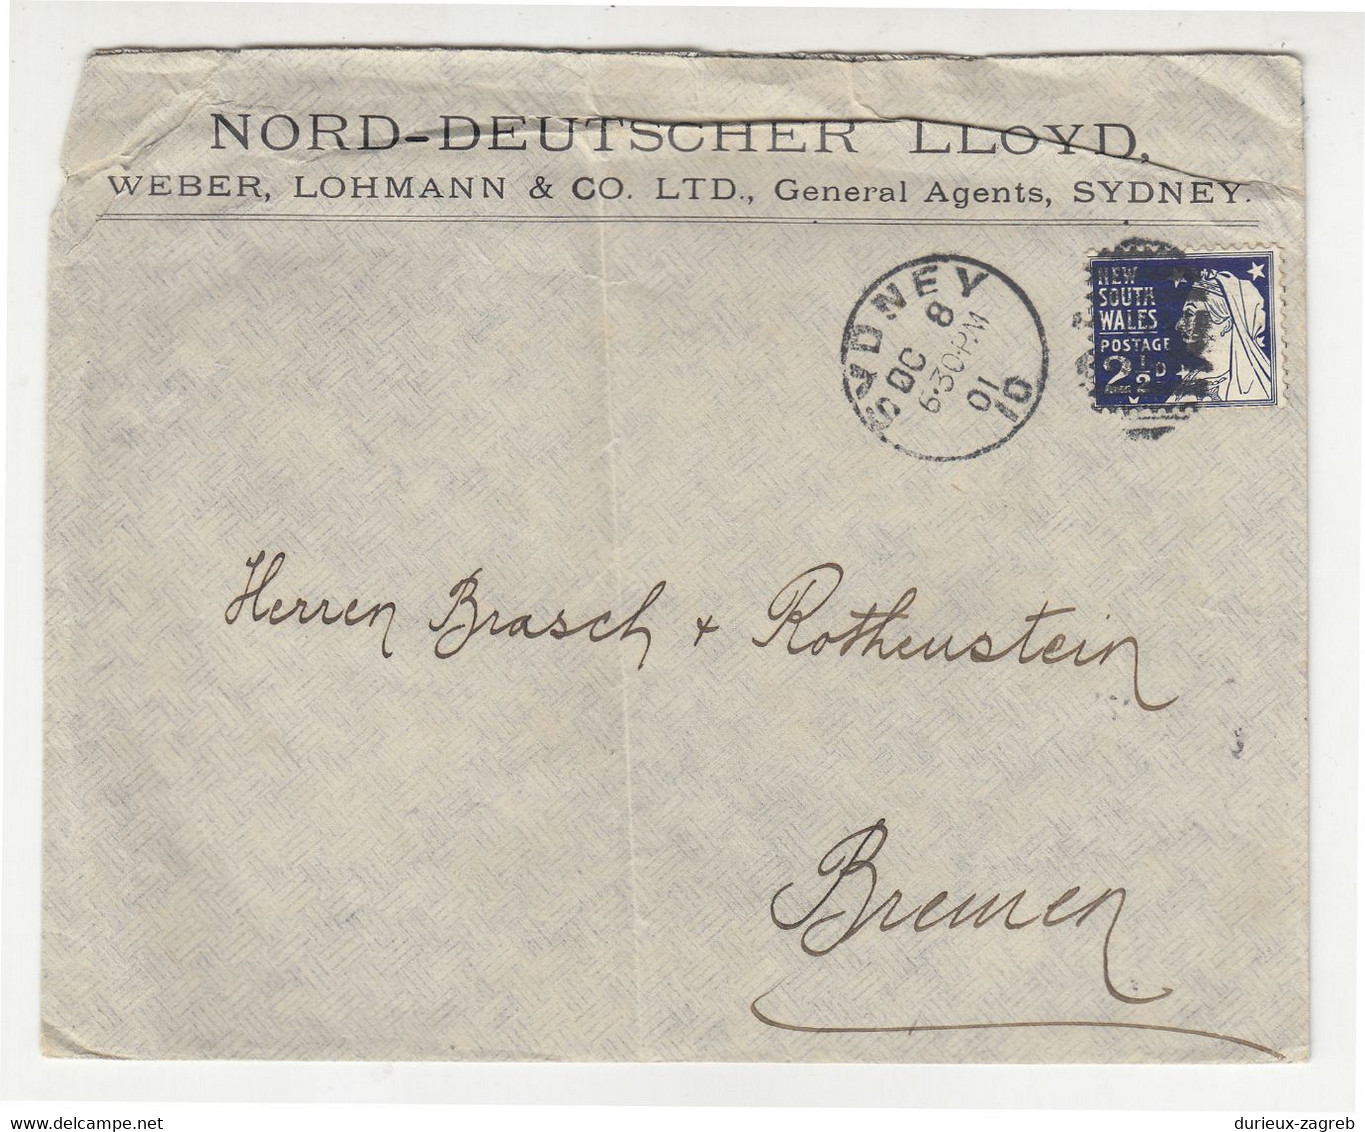 Nord-Deutscher Lloyd, Sydney Company Letter Cover Posted 1901 To Bremen B220901 - Lettres & Documents